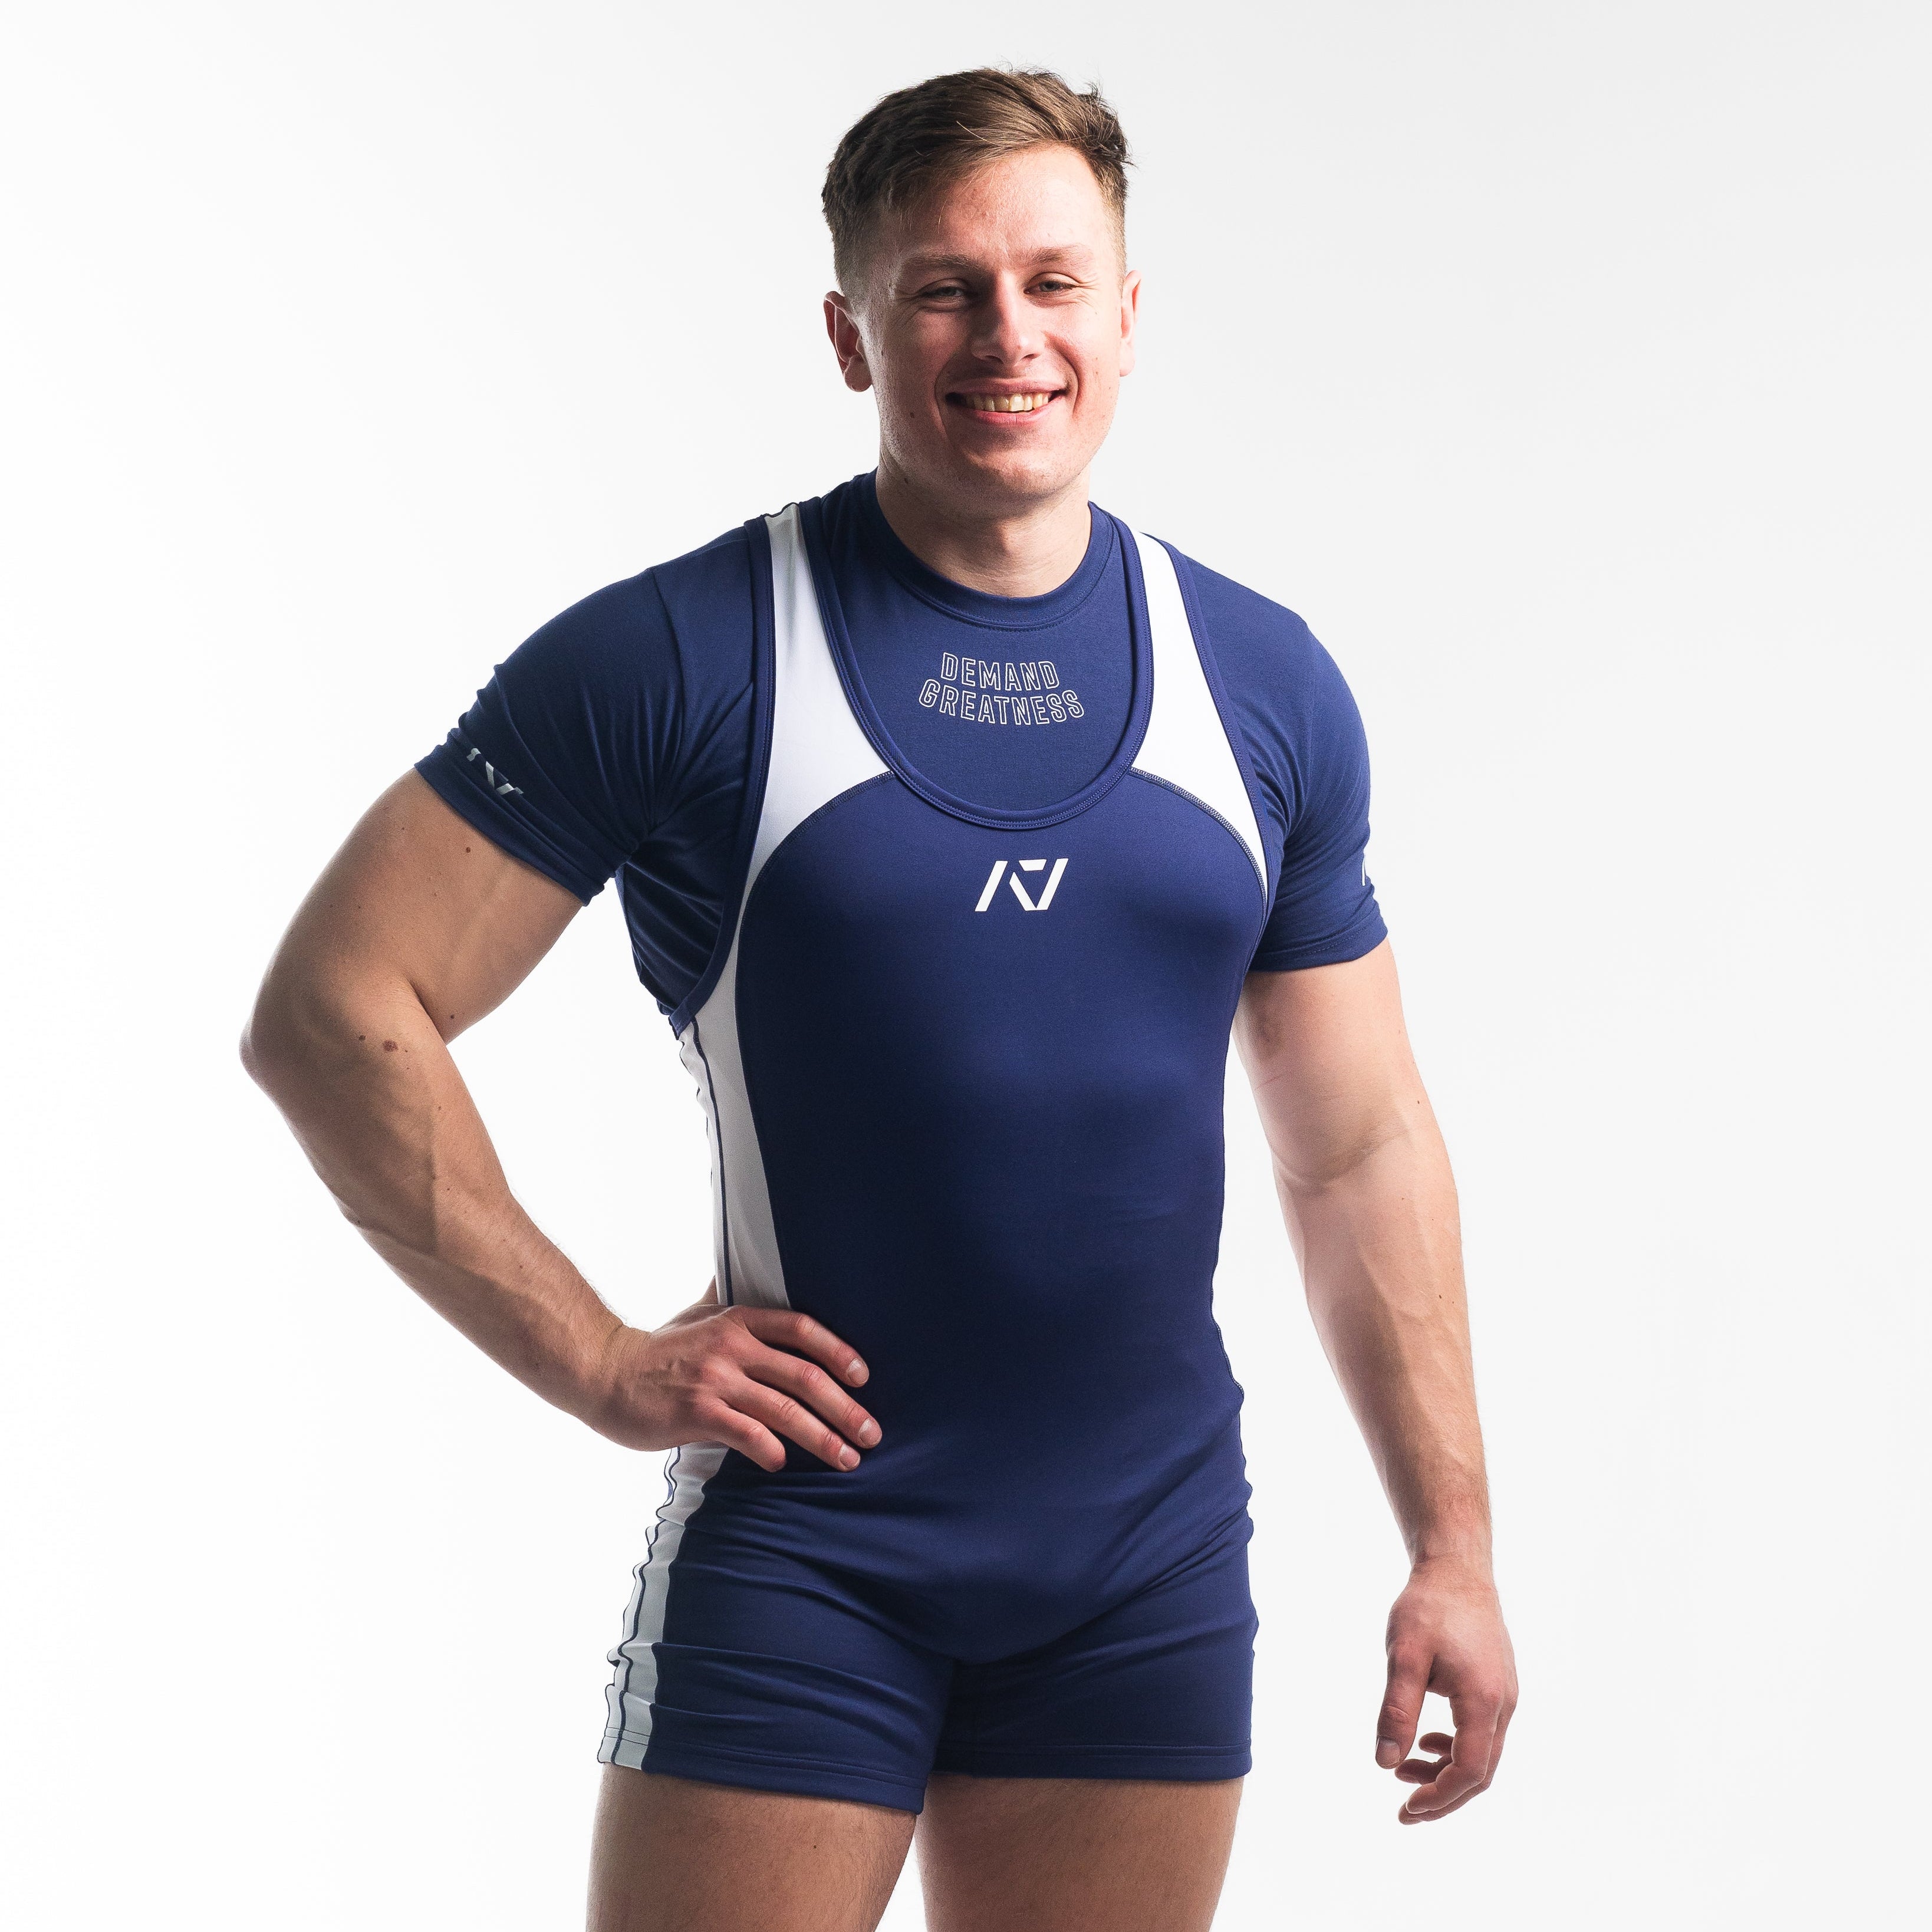 A7 IPF Approved Night Light Luno singlet features extra lat mobility, side panel stitching to guide the squat depth level and curved panel design for a slimming look. The Women's cut singlet features a tapered waist and additional quad room. The IPF Approved Kit includes Luno Powerlifting Singlet, A7 Meet Shirt, A7 Zebra Wrist Wraps, A7 Deadlift Socks, Hourglass Knee Sleeves (Stiff Knee Sleeves and Rigor Mortis Knee Sleeves). All A7 Powerlifting Equipment shipping to UK, Norway, Switzerland and Iceland.